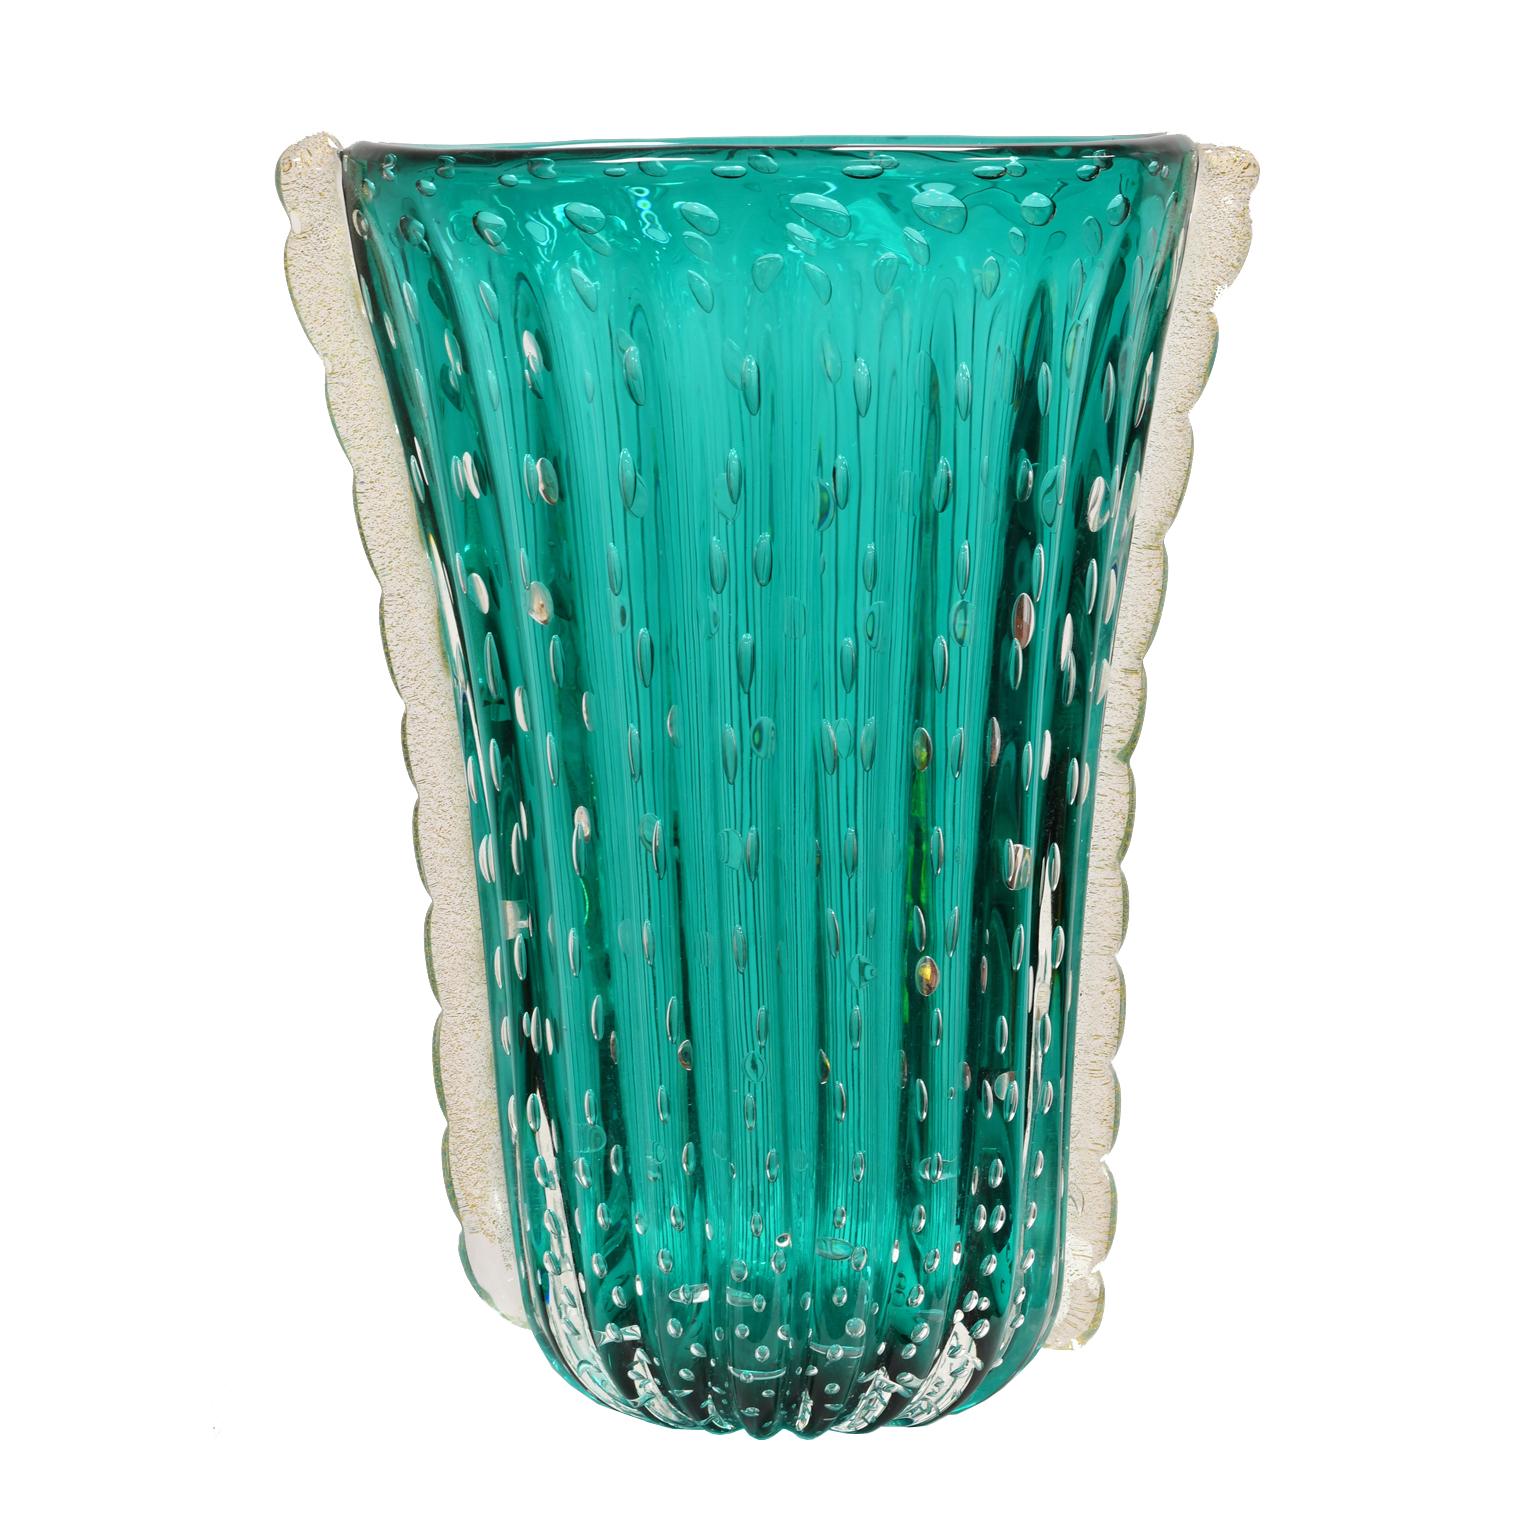 Murano Glass Teal-Colored Vase from the Workshop of Archimede Seguso Dated 1999 In Good Condition In Miami, FL